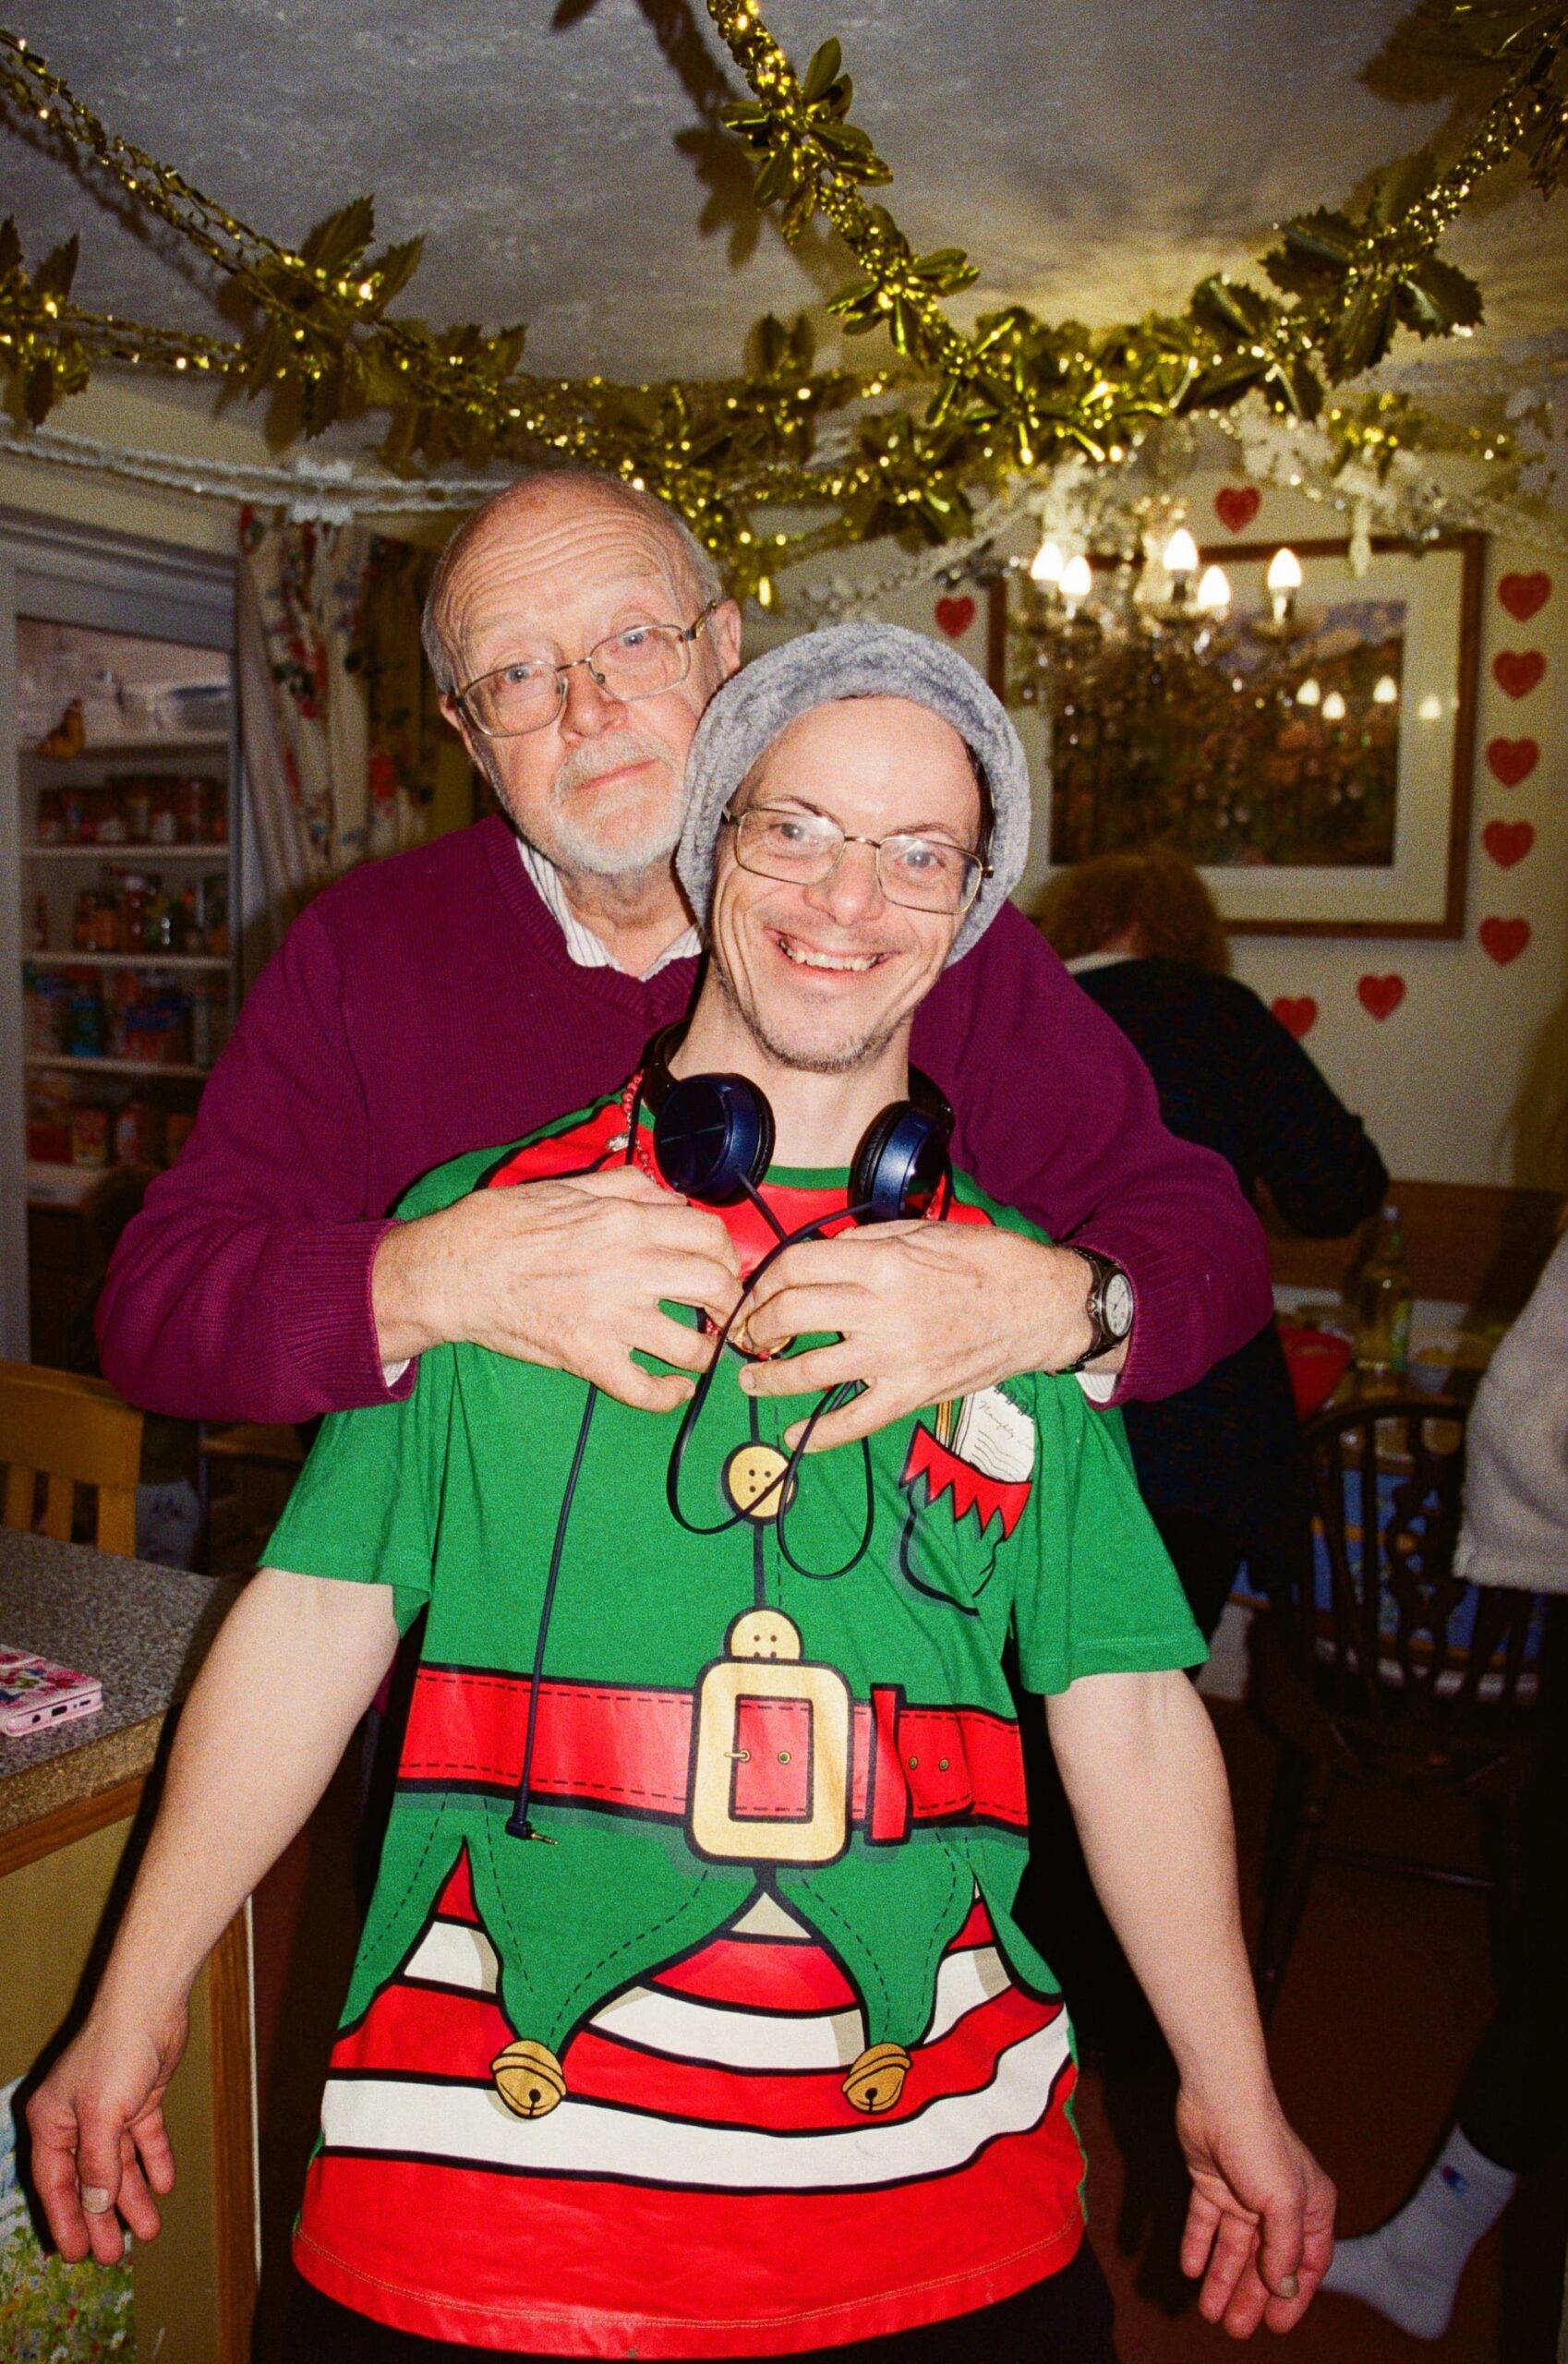 Father And Son Share A Moment At Christmas A man with downs syndrome smiles broadly at the camera while his father hugs him. They are in a dining room decorated for Christmas. Film image with flash.